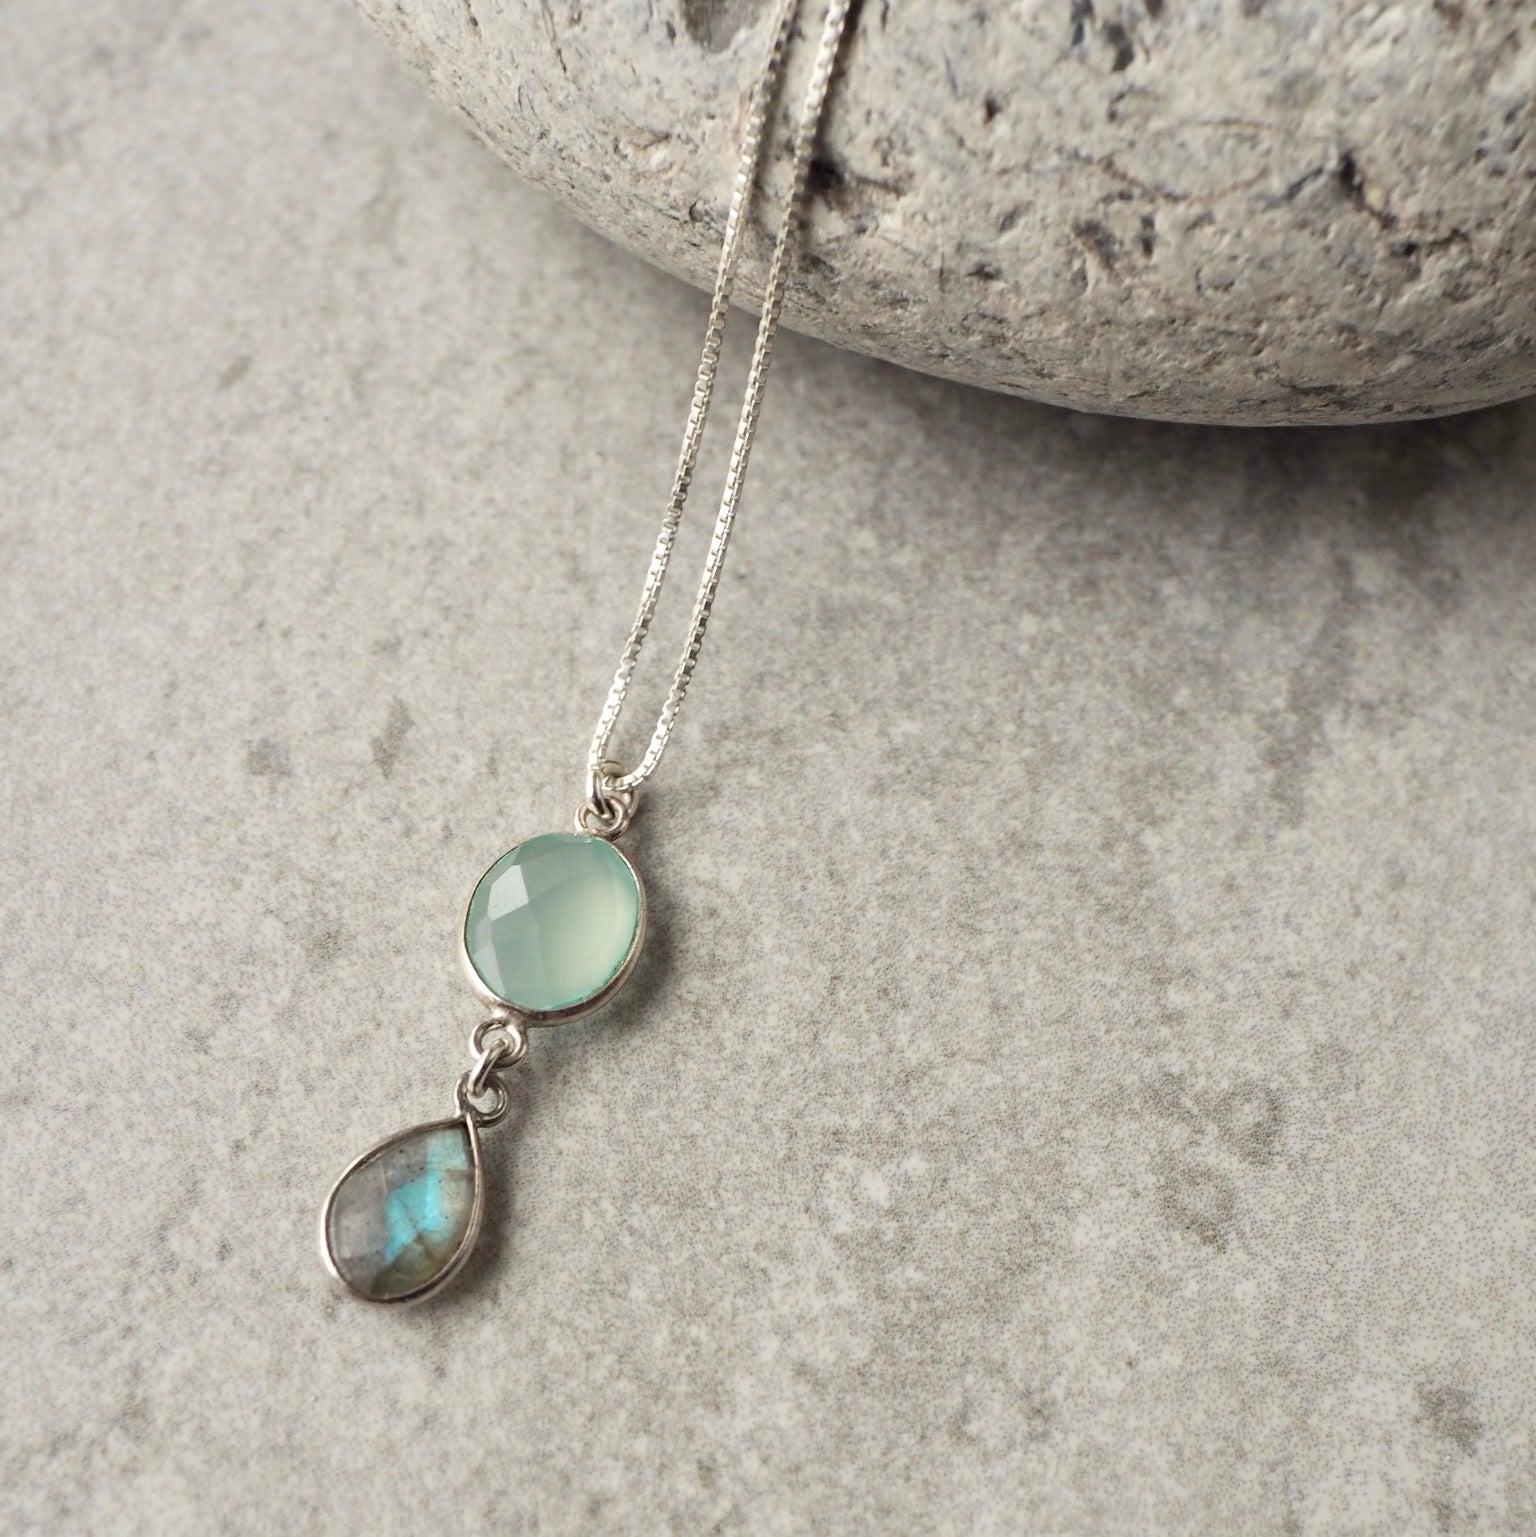 Aqua Chalcedony and Labradorite Sterling Silver Necklace